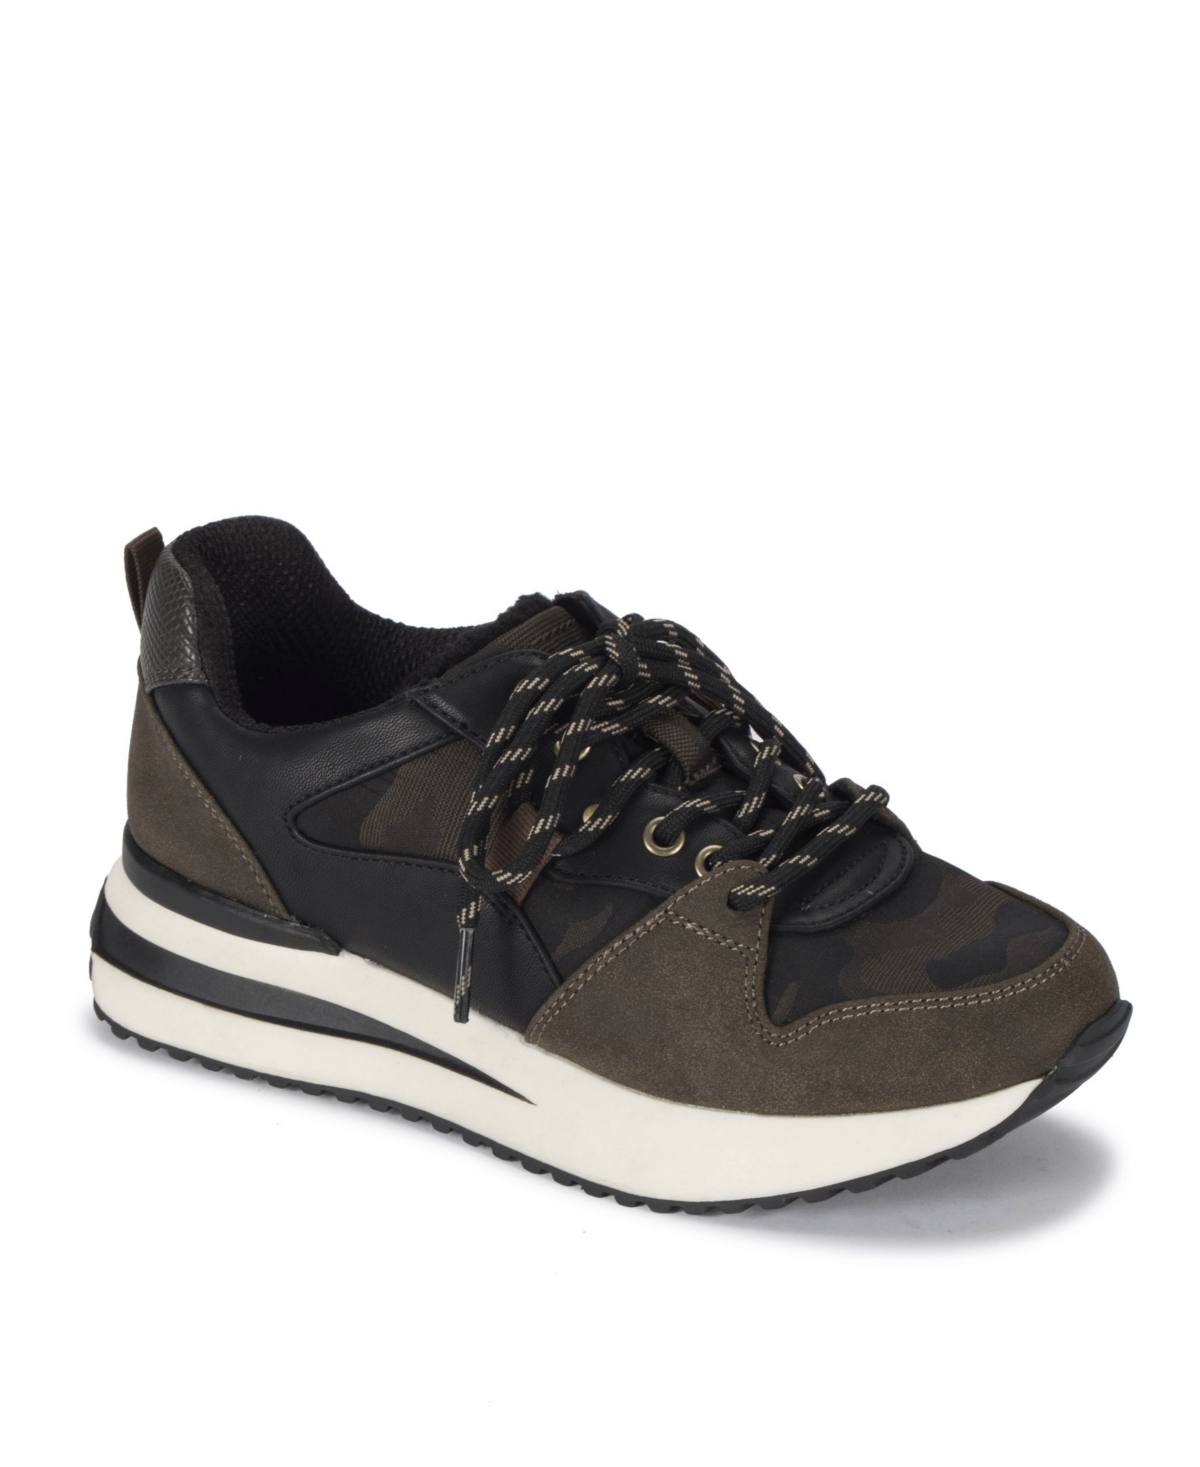 Women's Cabriole Lace Up Sneakers - Army